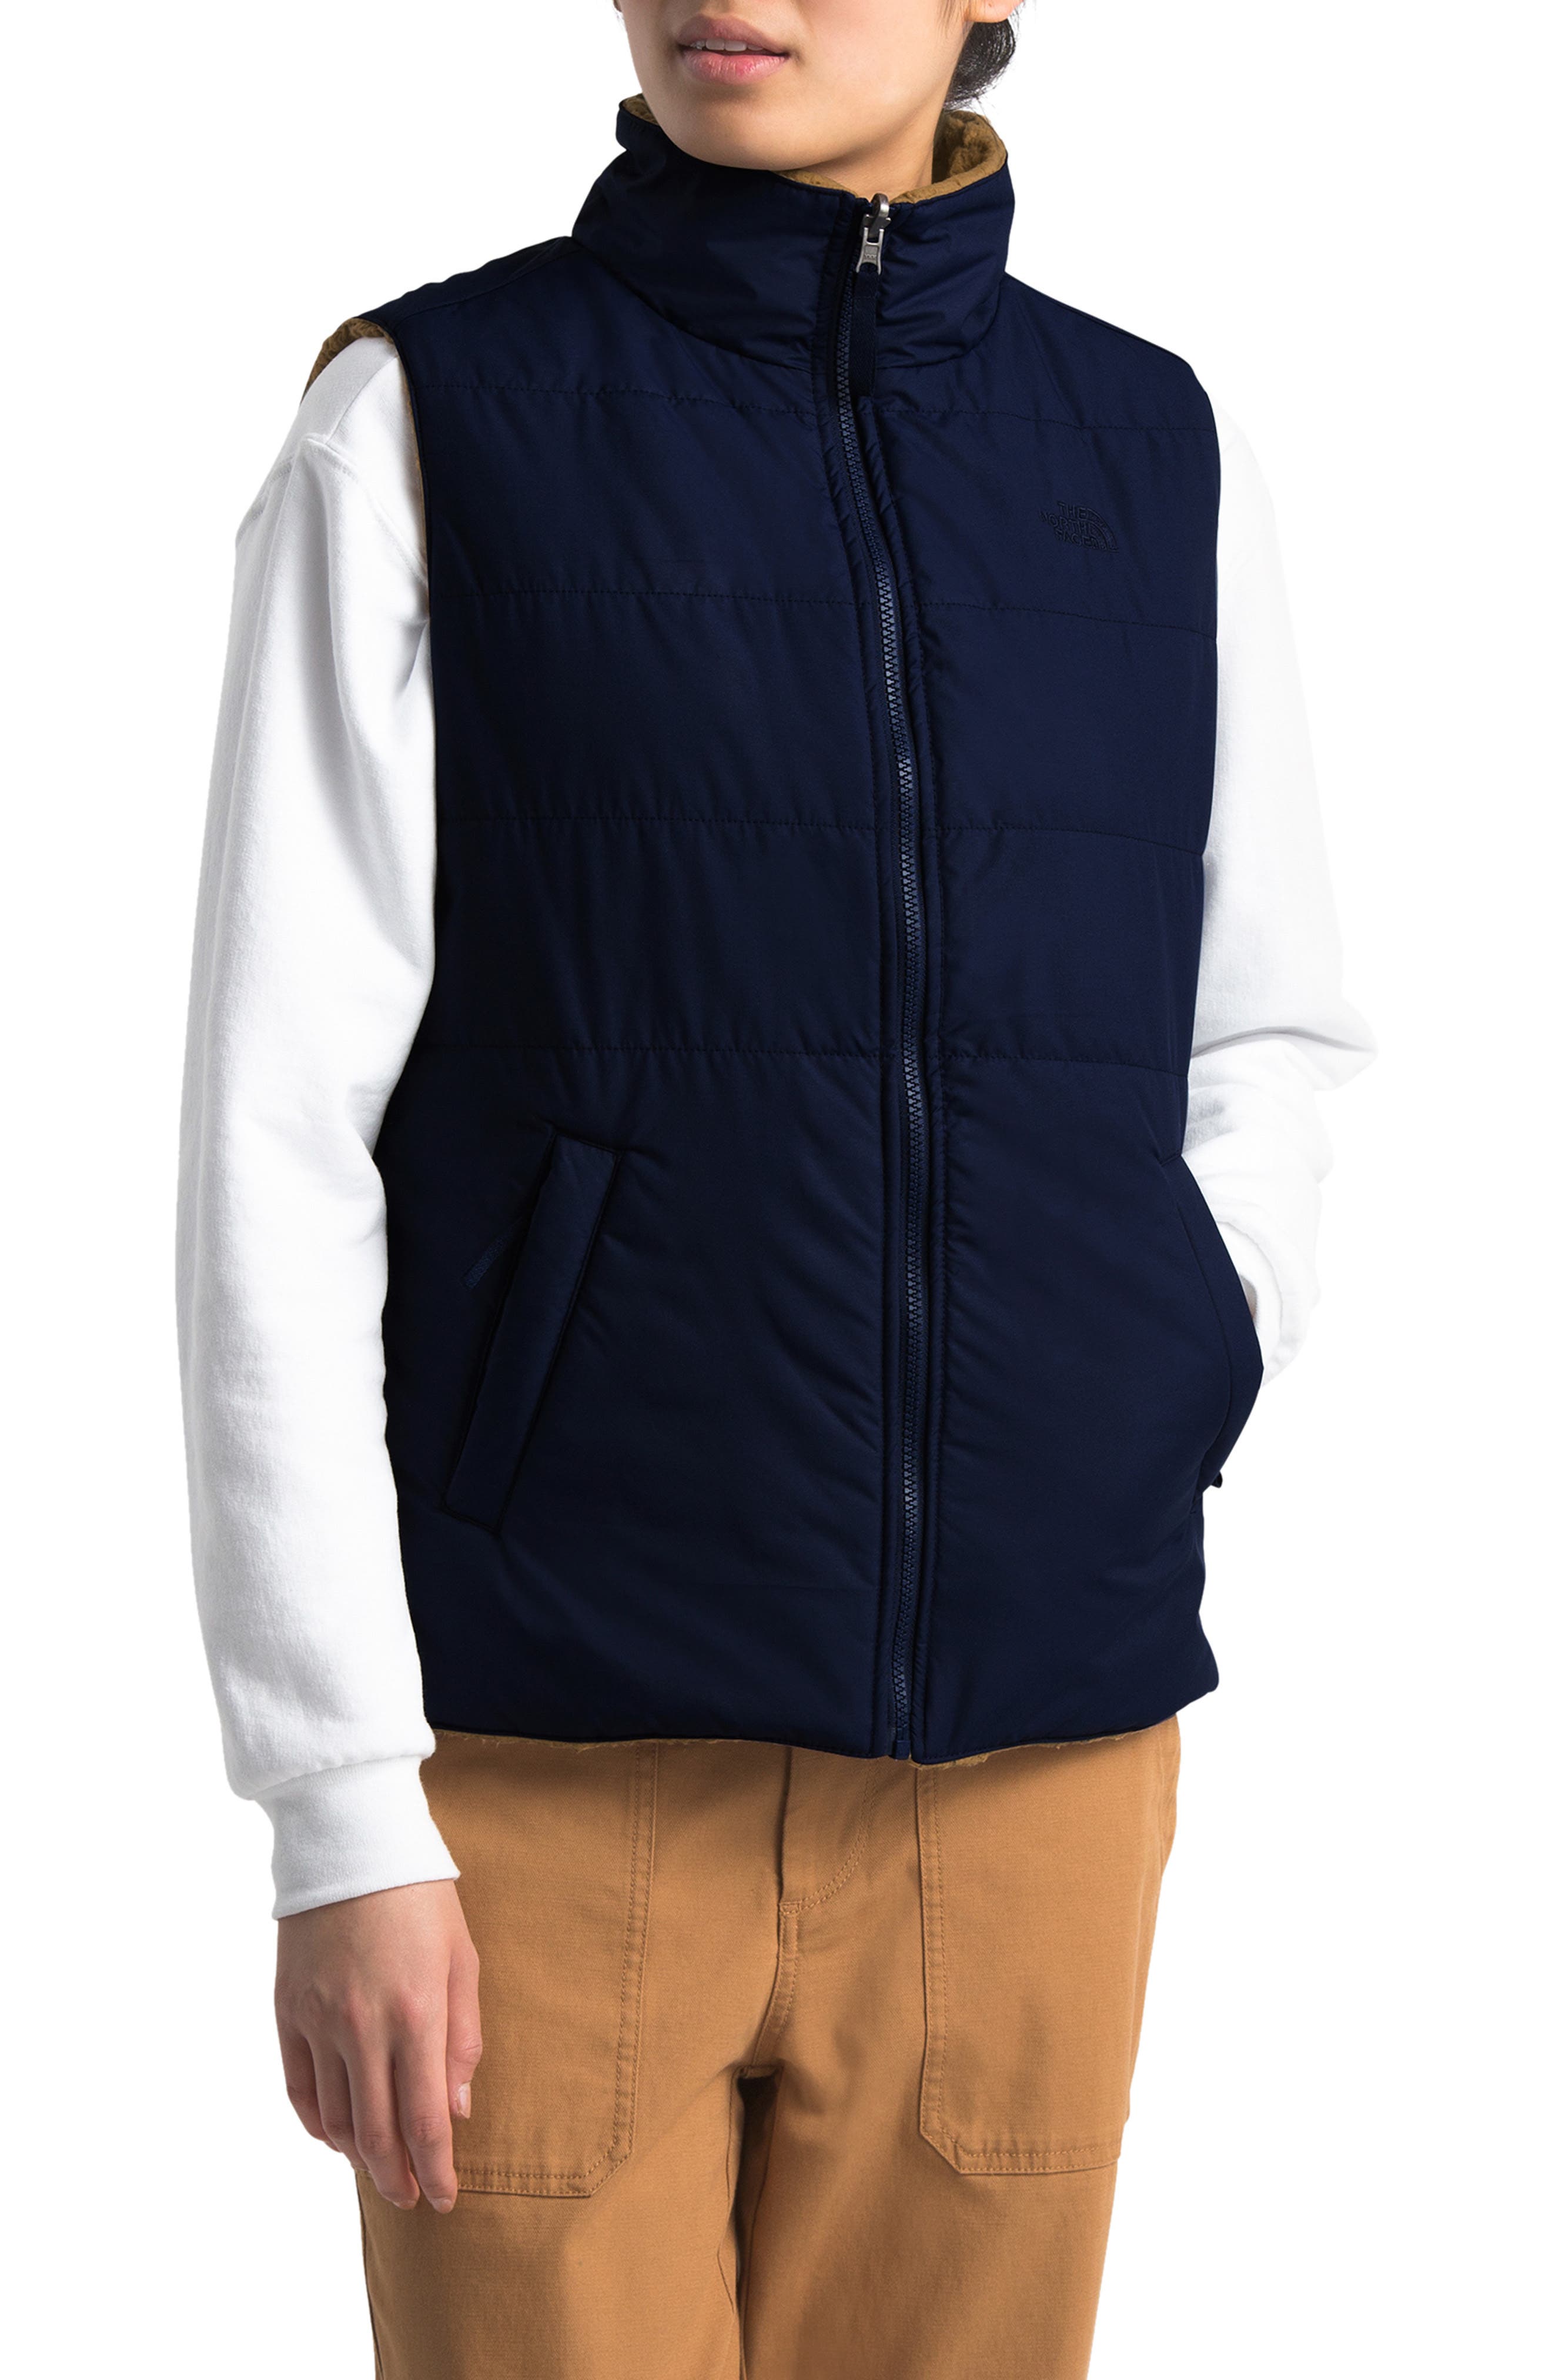 the north face hey mama vest